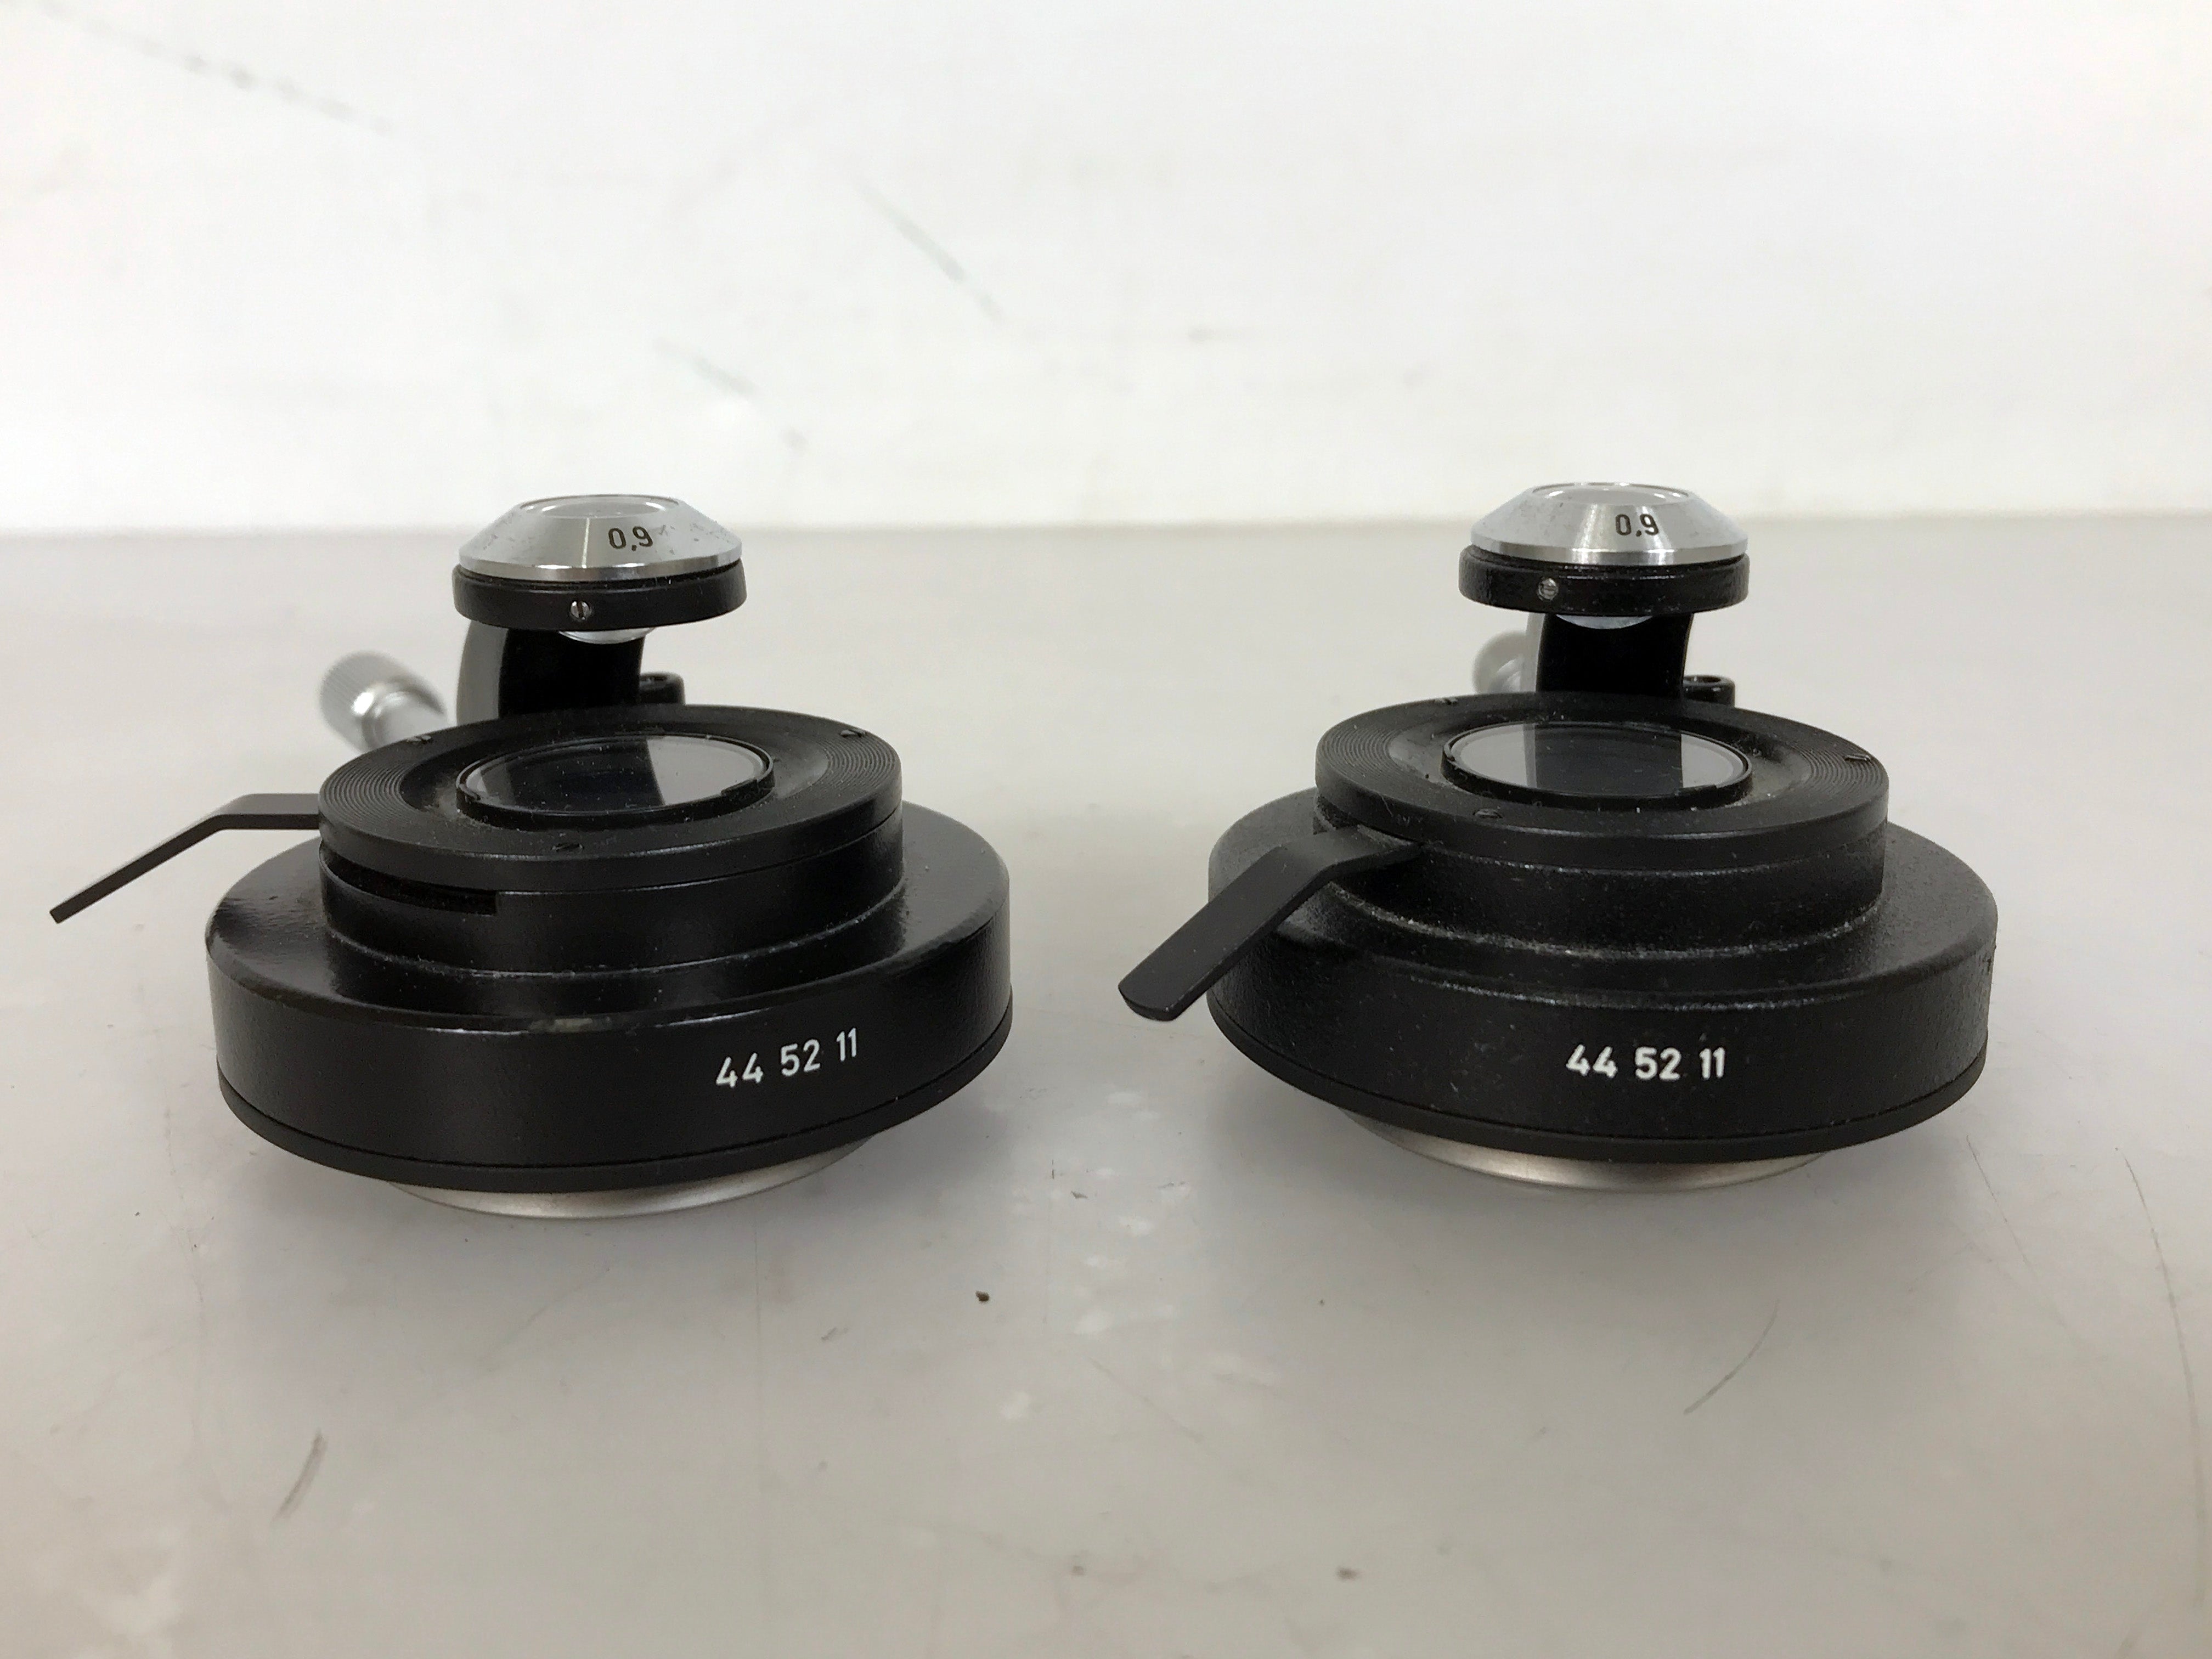 Pair of Zeiss 44 52 11 Condensers 0.9 for Standard 25 Microscope